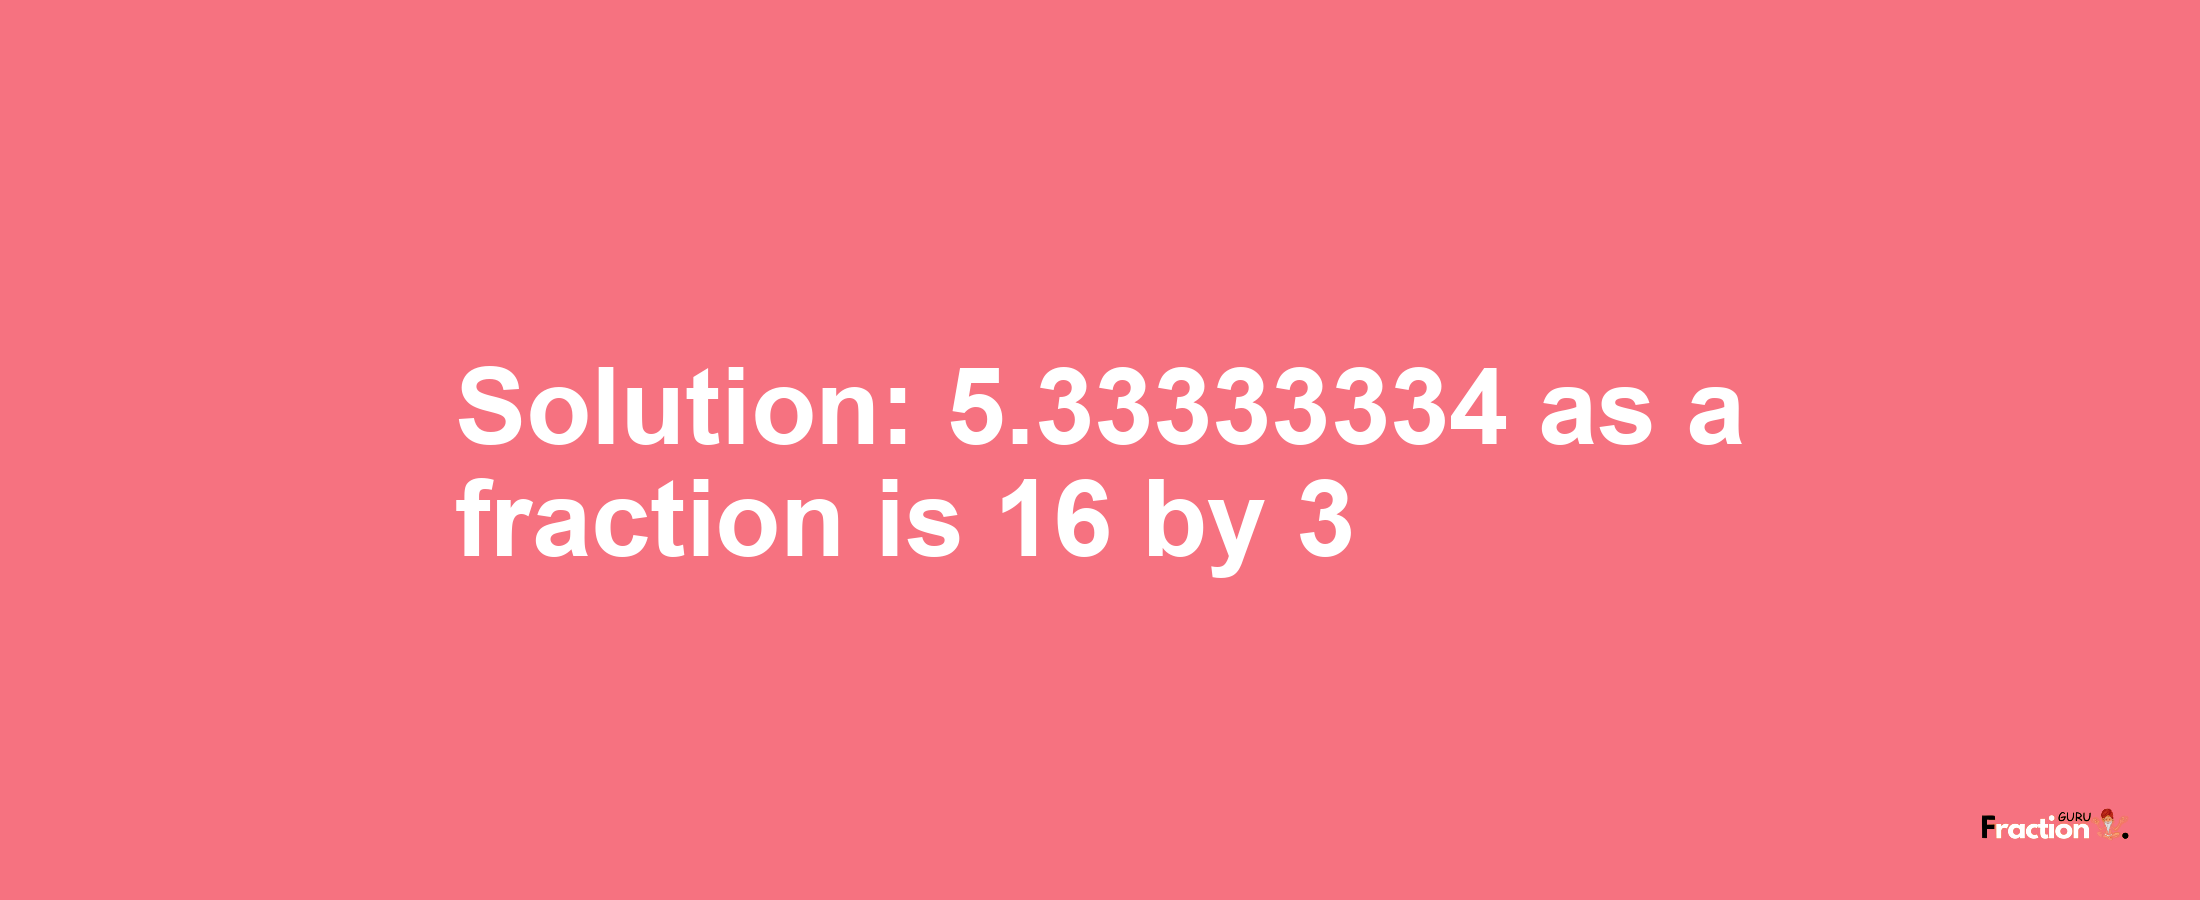 Solution:5.33333334 as a fraction is 16/3